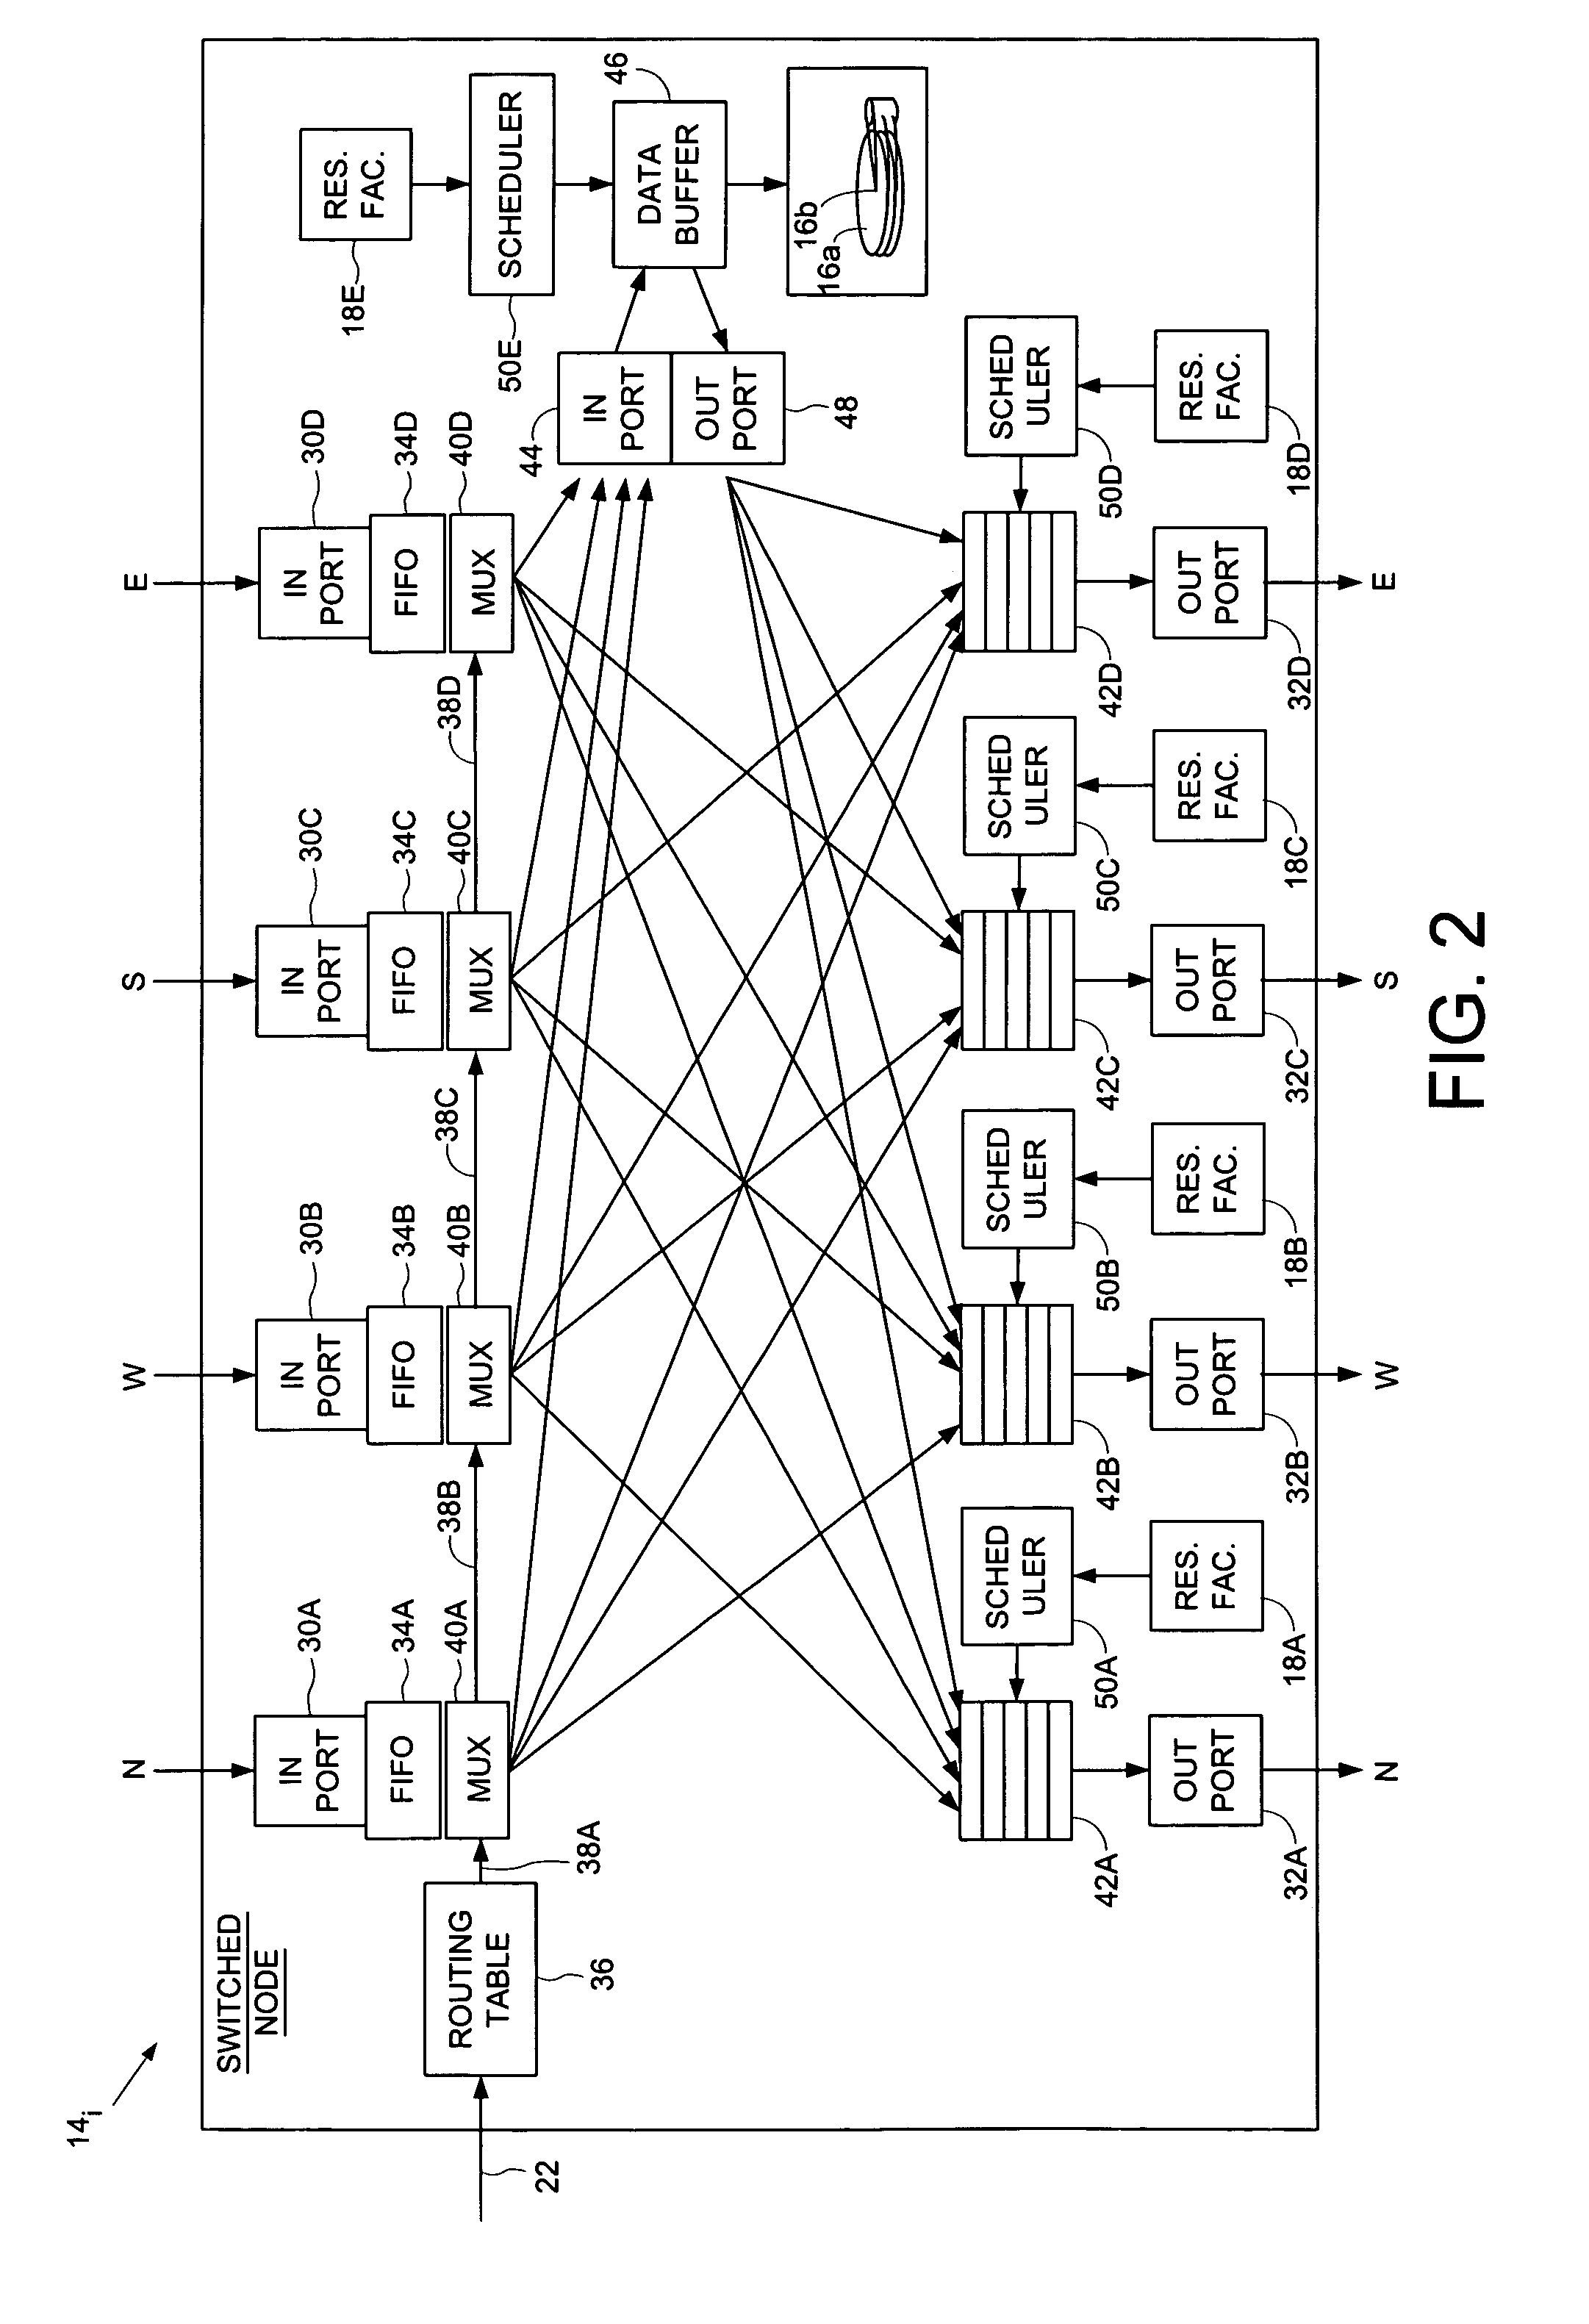 Resource reservation system in a computer network to support end-to-end quality-of-service constraints